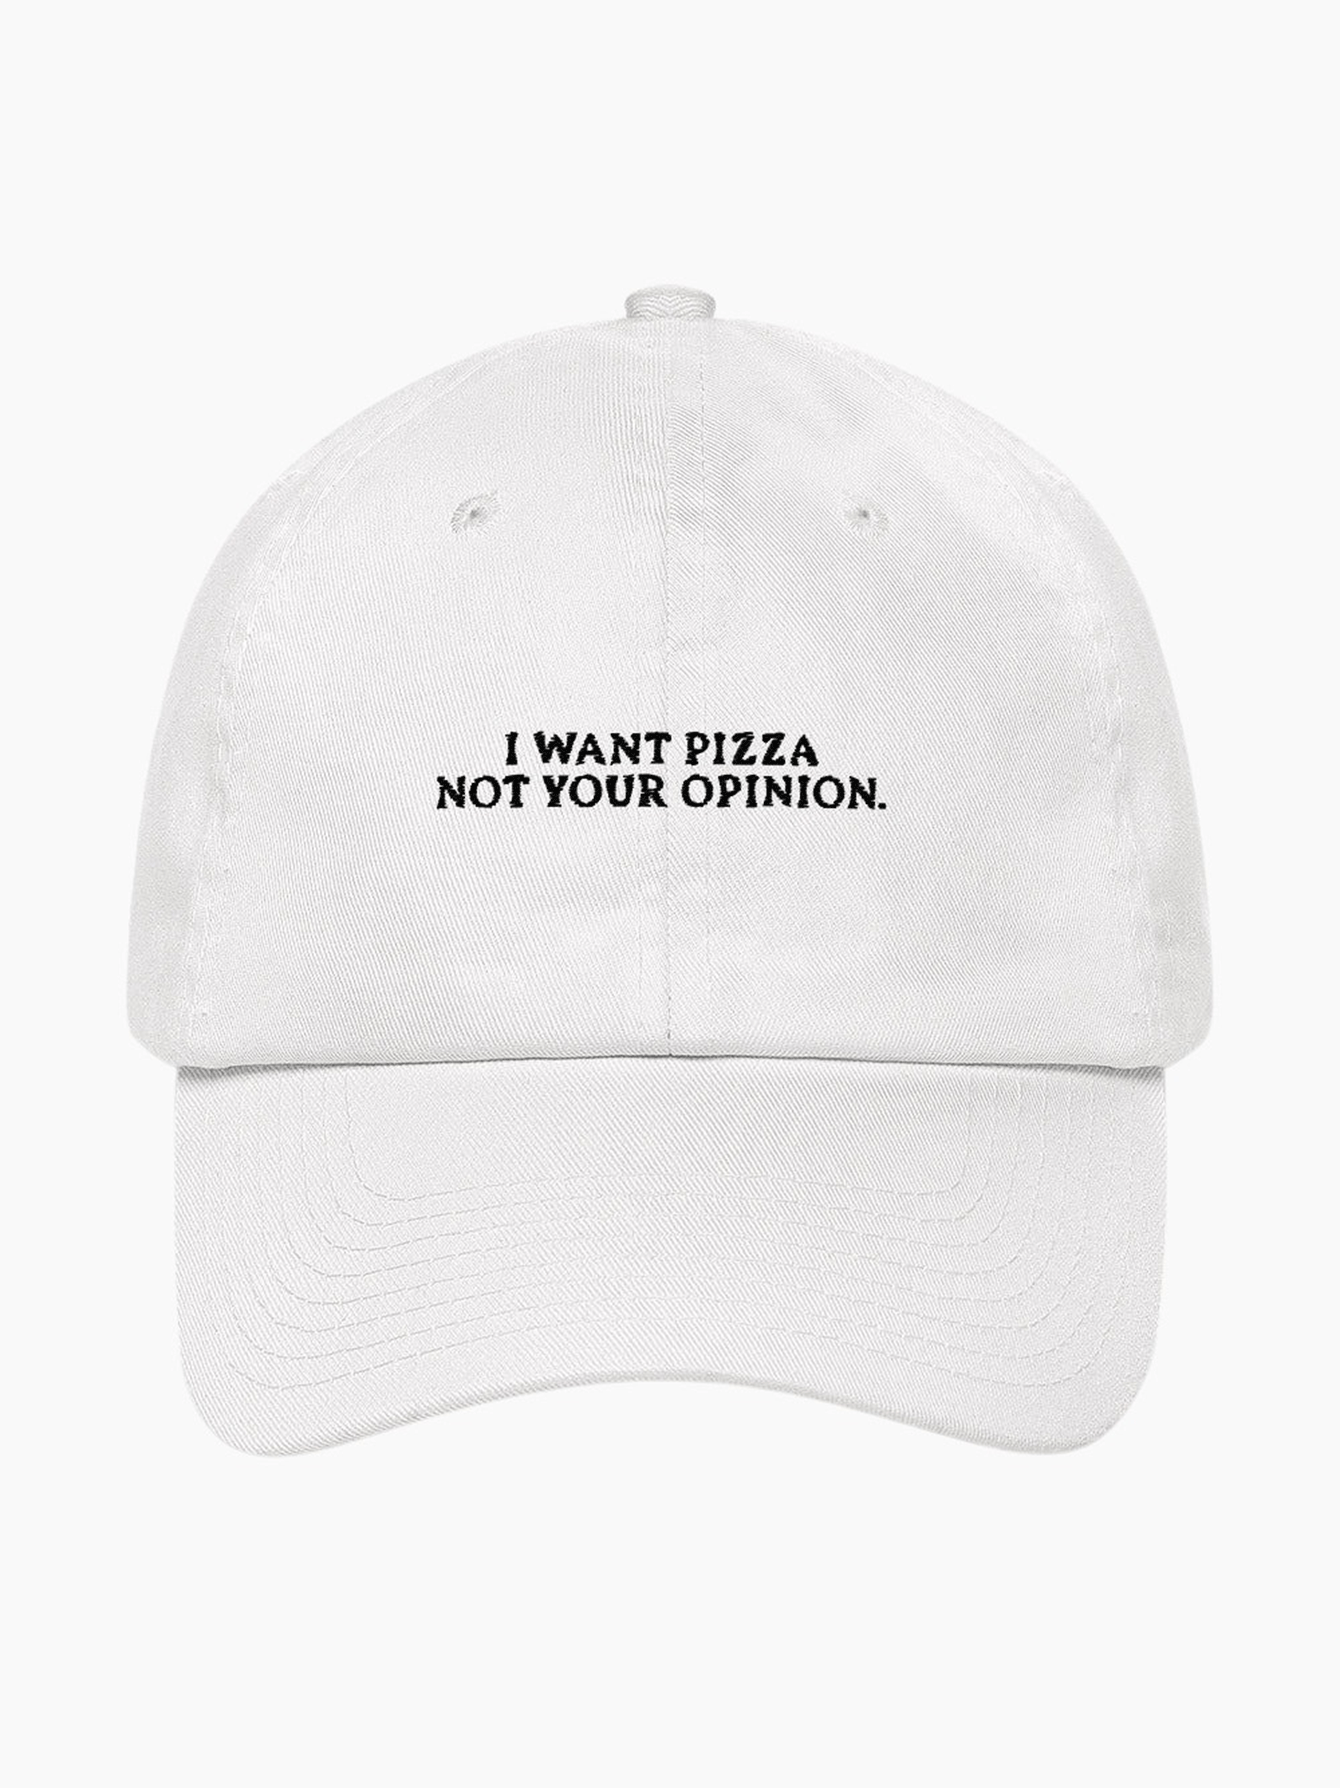 I Want Pizza Not Your Opinion Cap